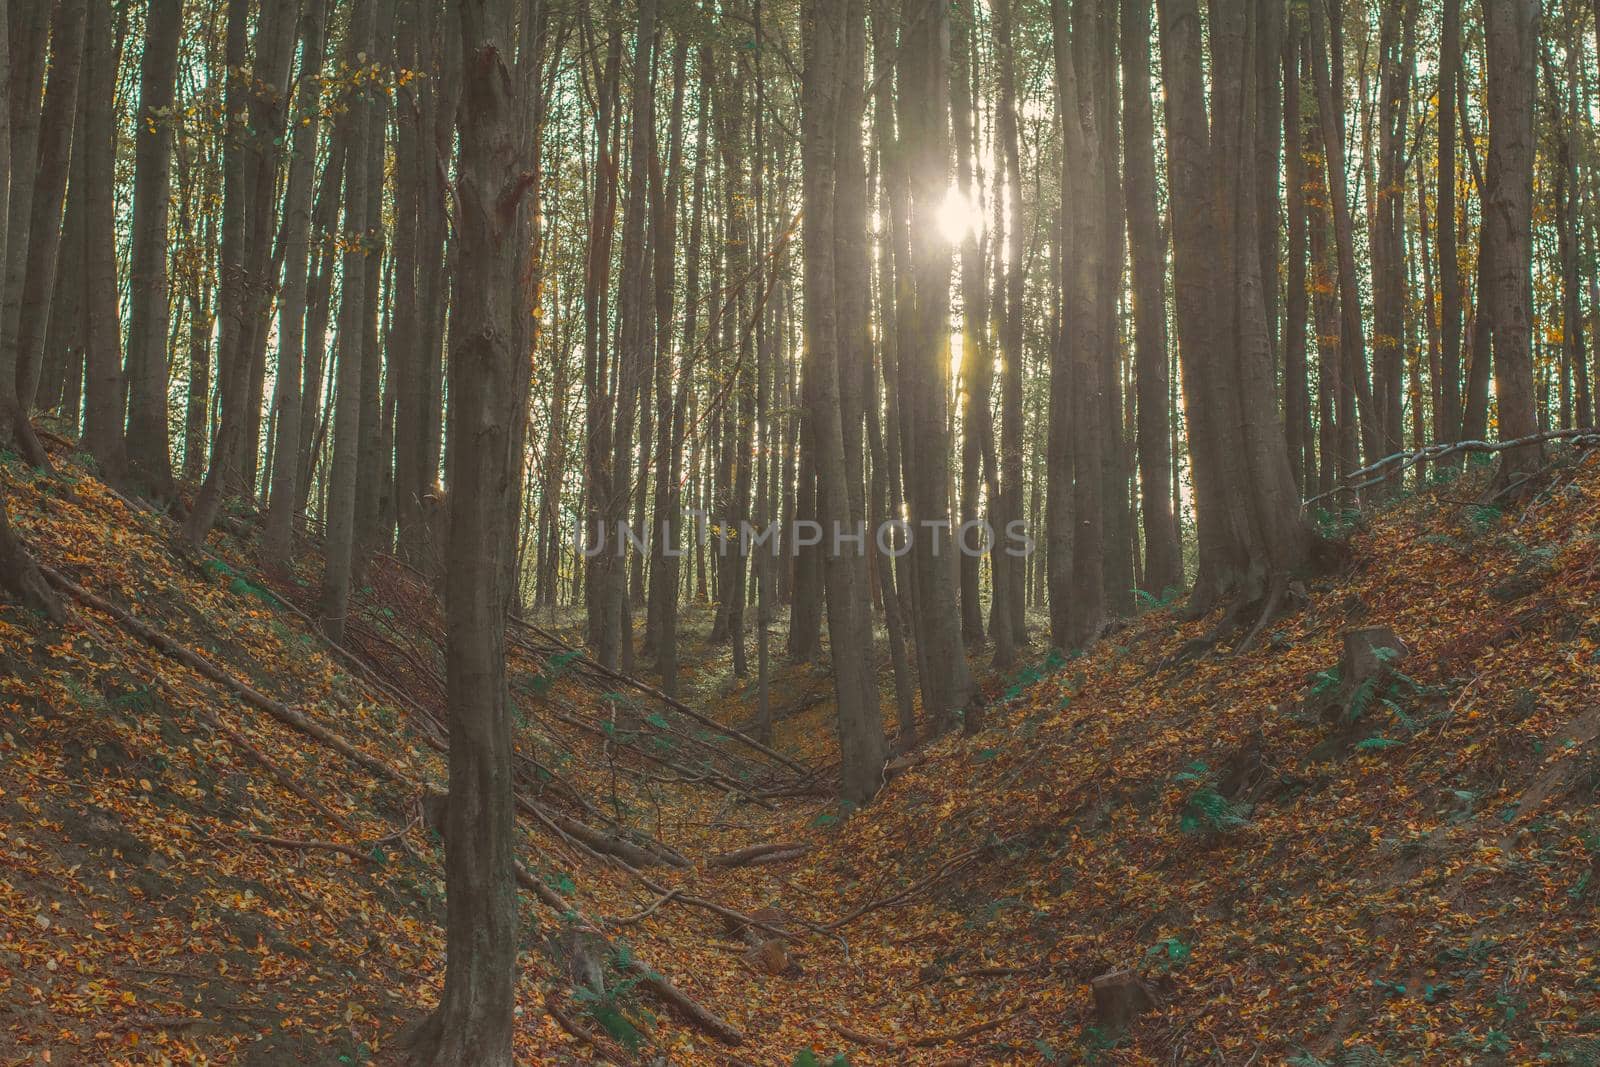 Autumn Forest Scenery With Illuminated Sun Lights. High quality photo